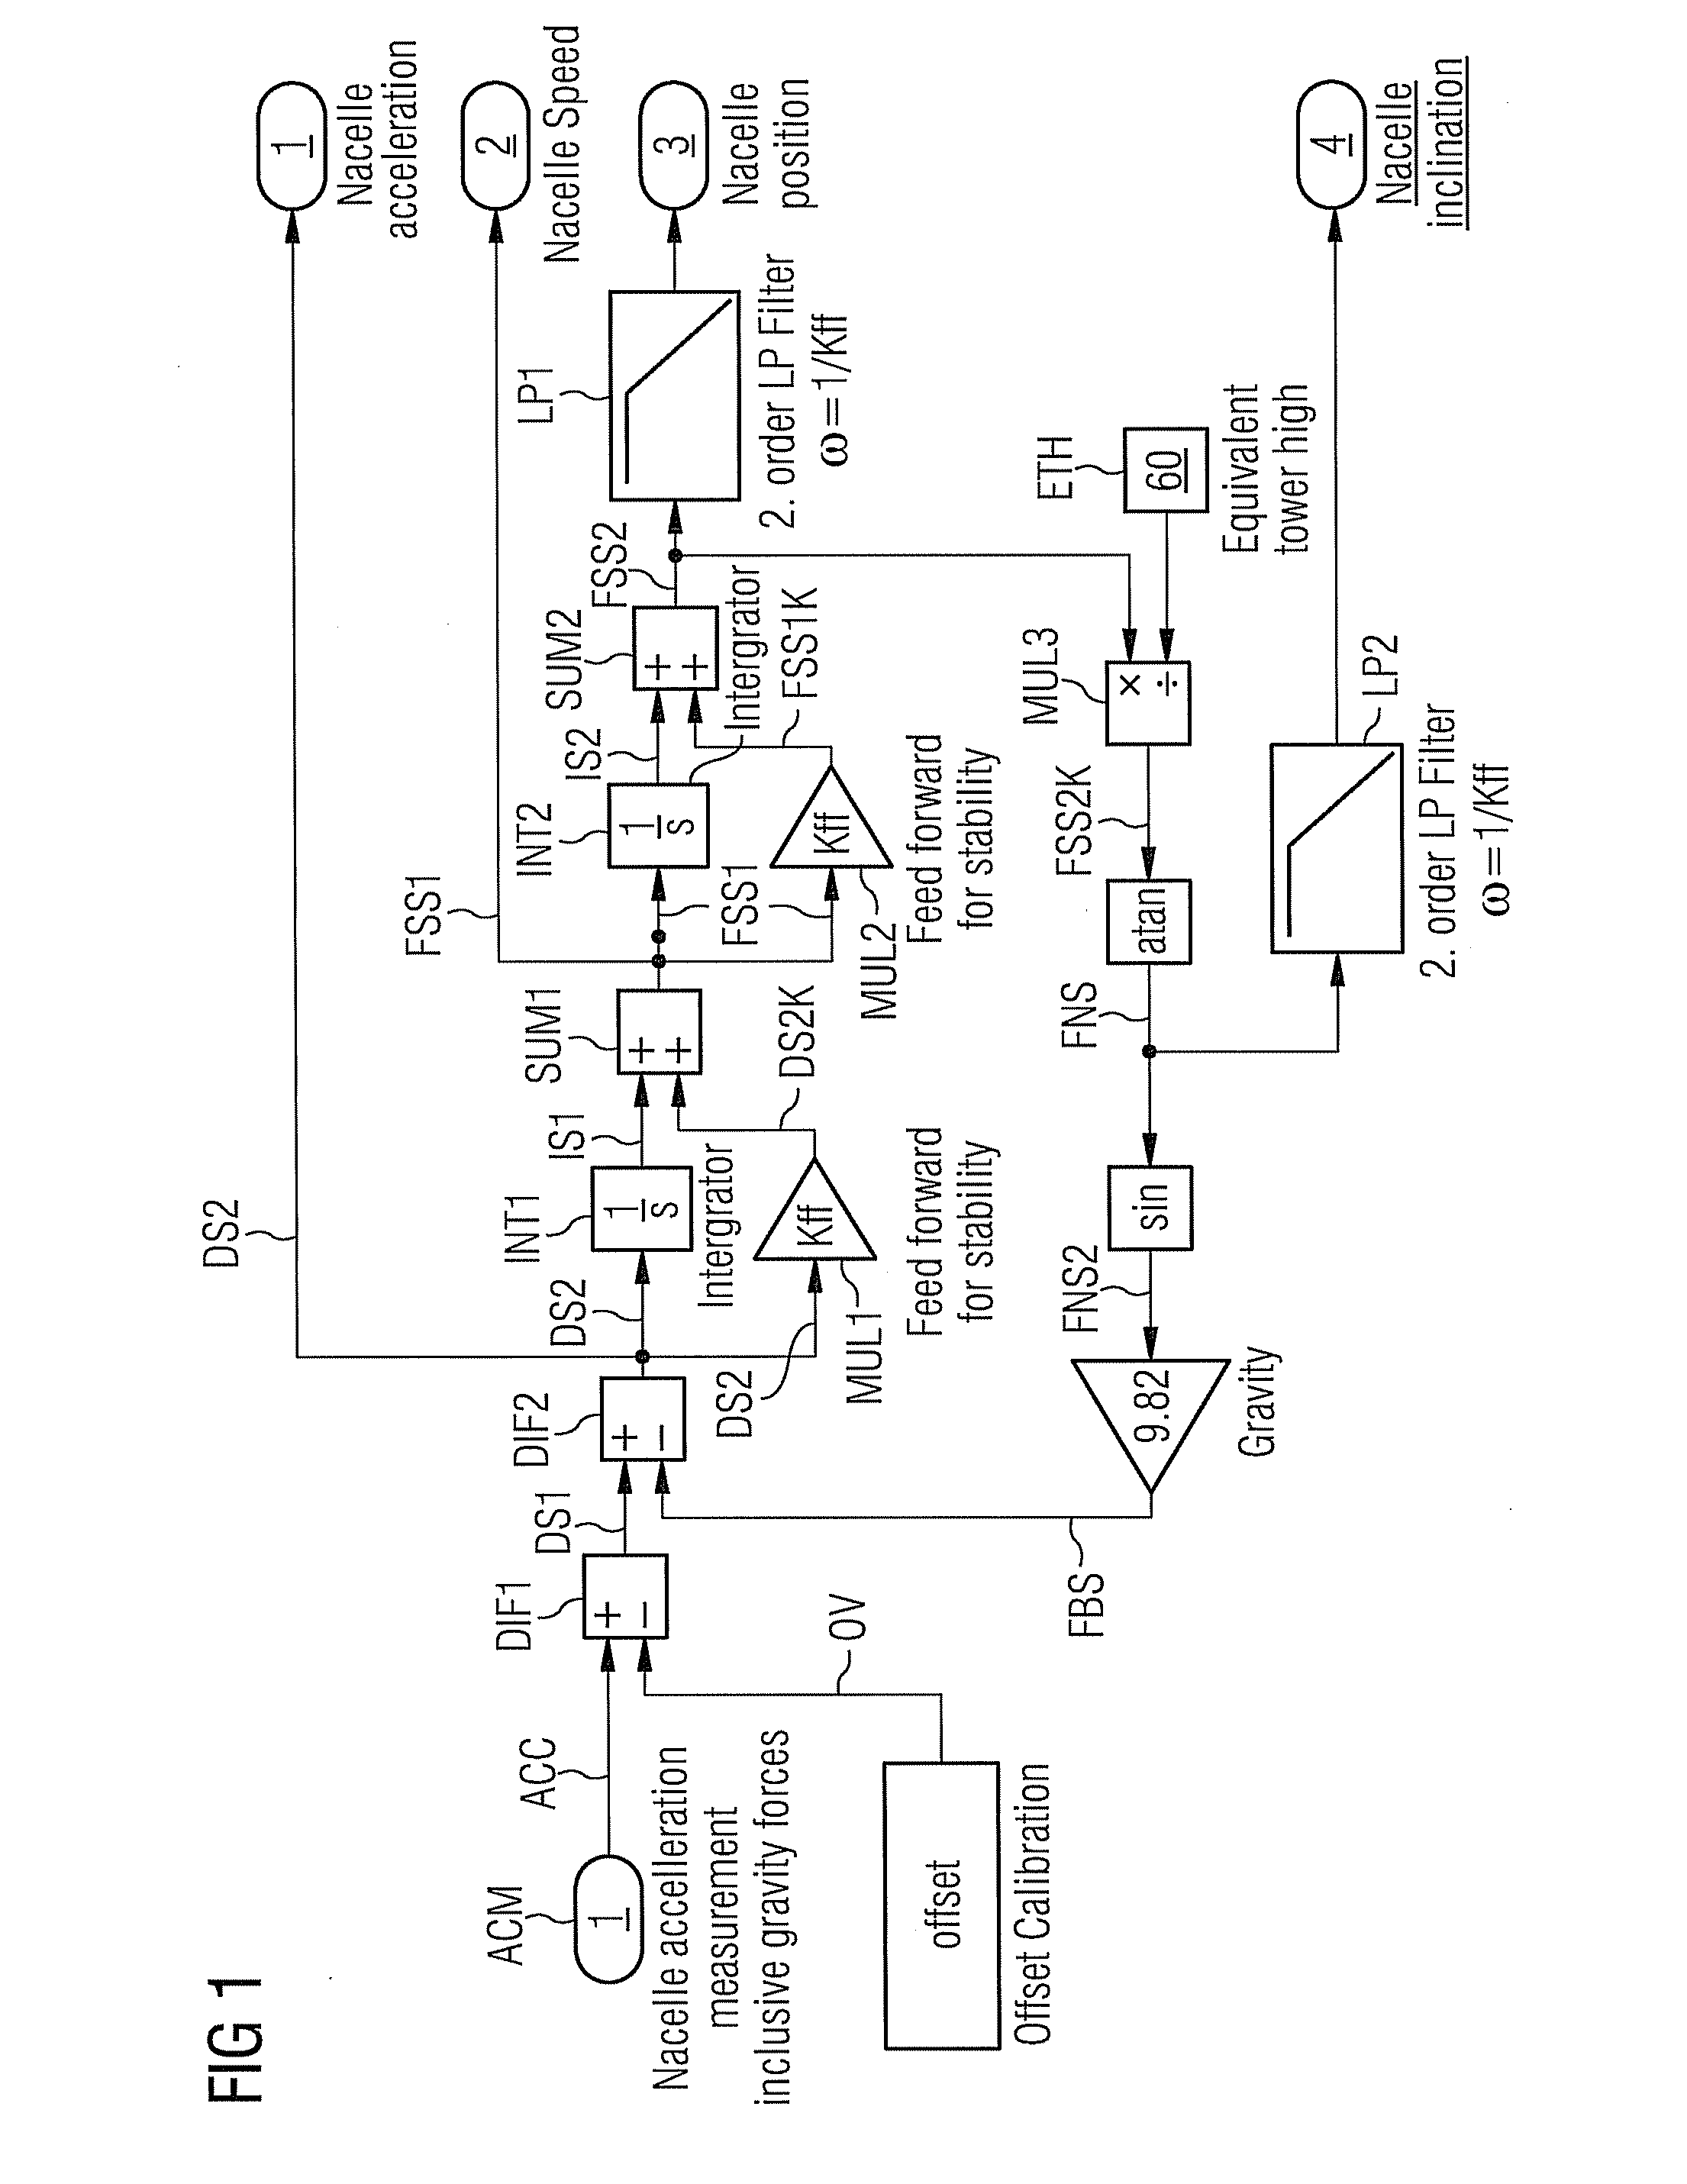 Method for the determination of a nacelle-inclination